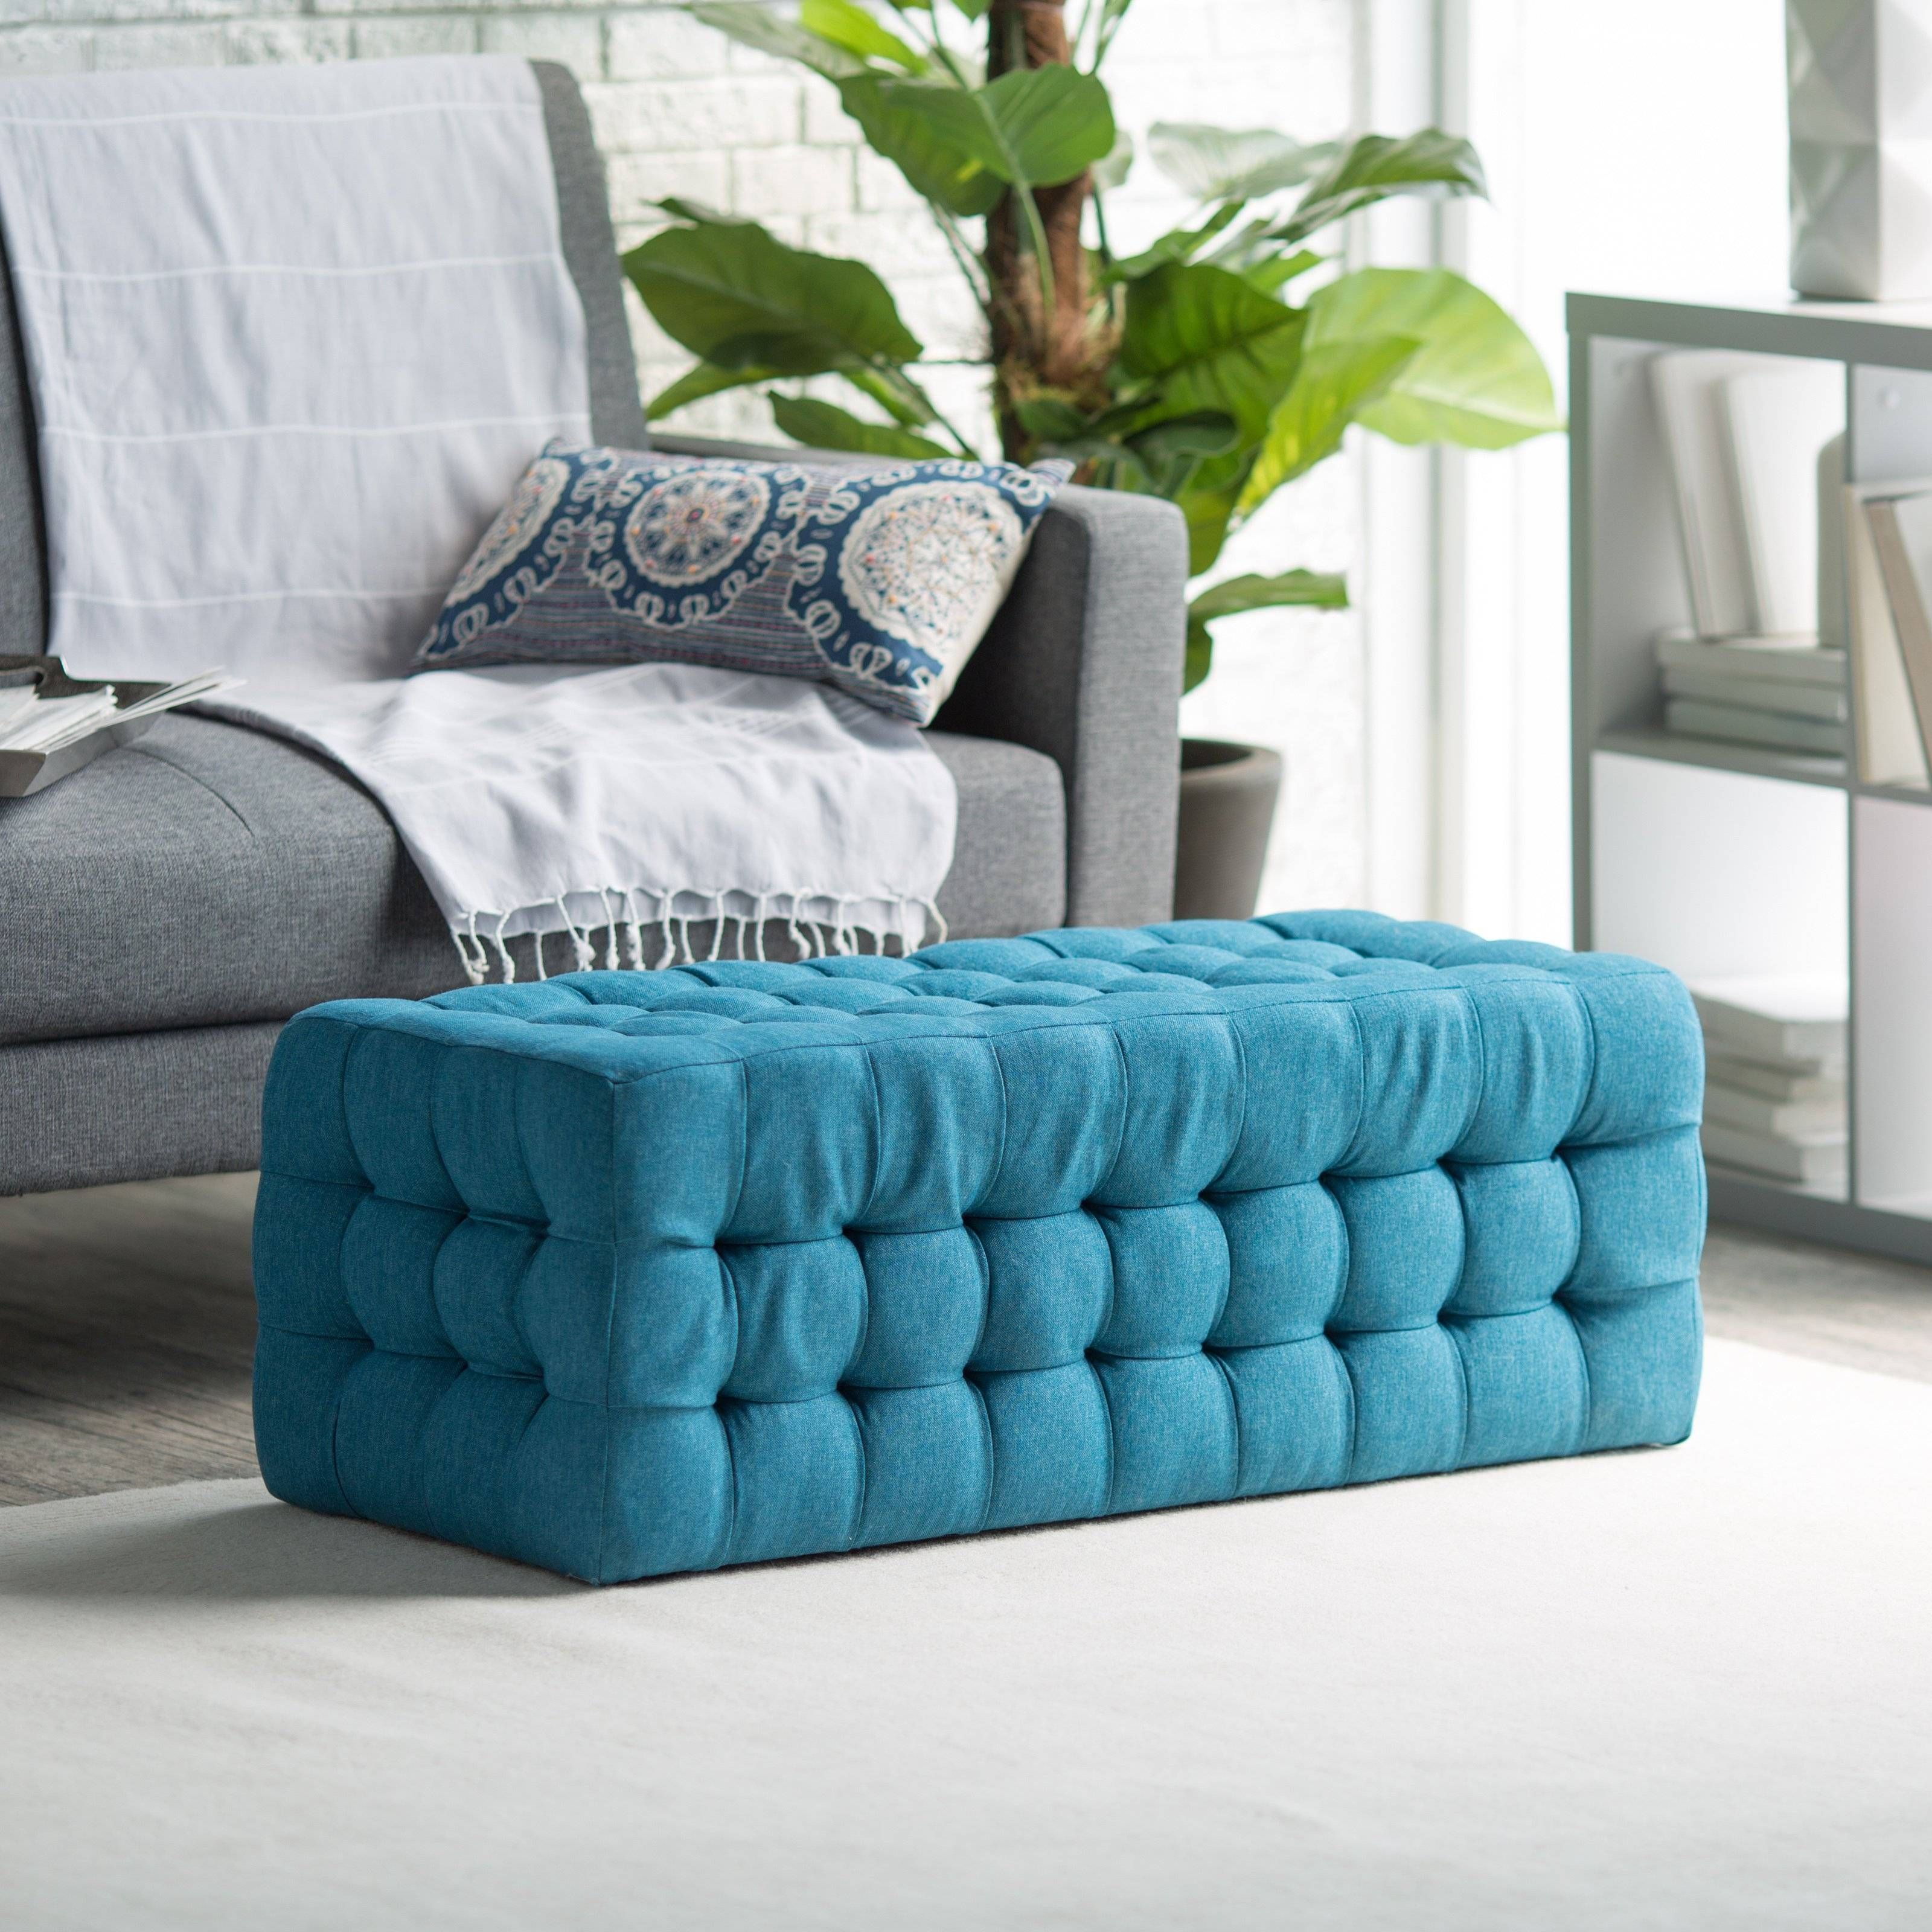 Coffee Table: Brilliant Blue Ottoman Coffee Table Designs Blue In Fabric Coffee Tables (View 12 of 30)